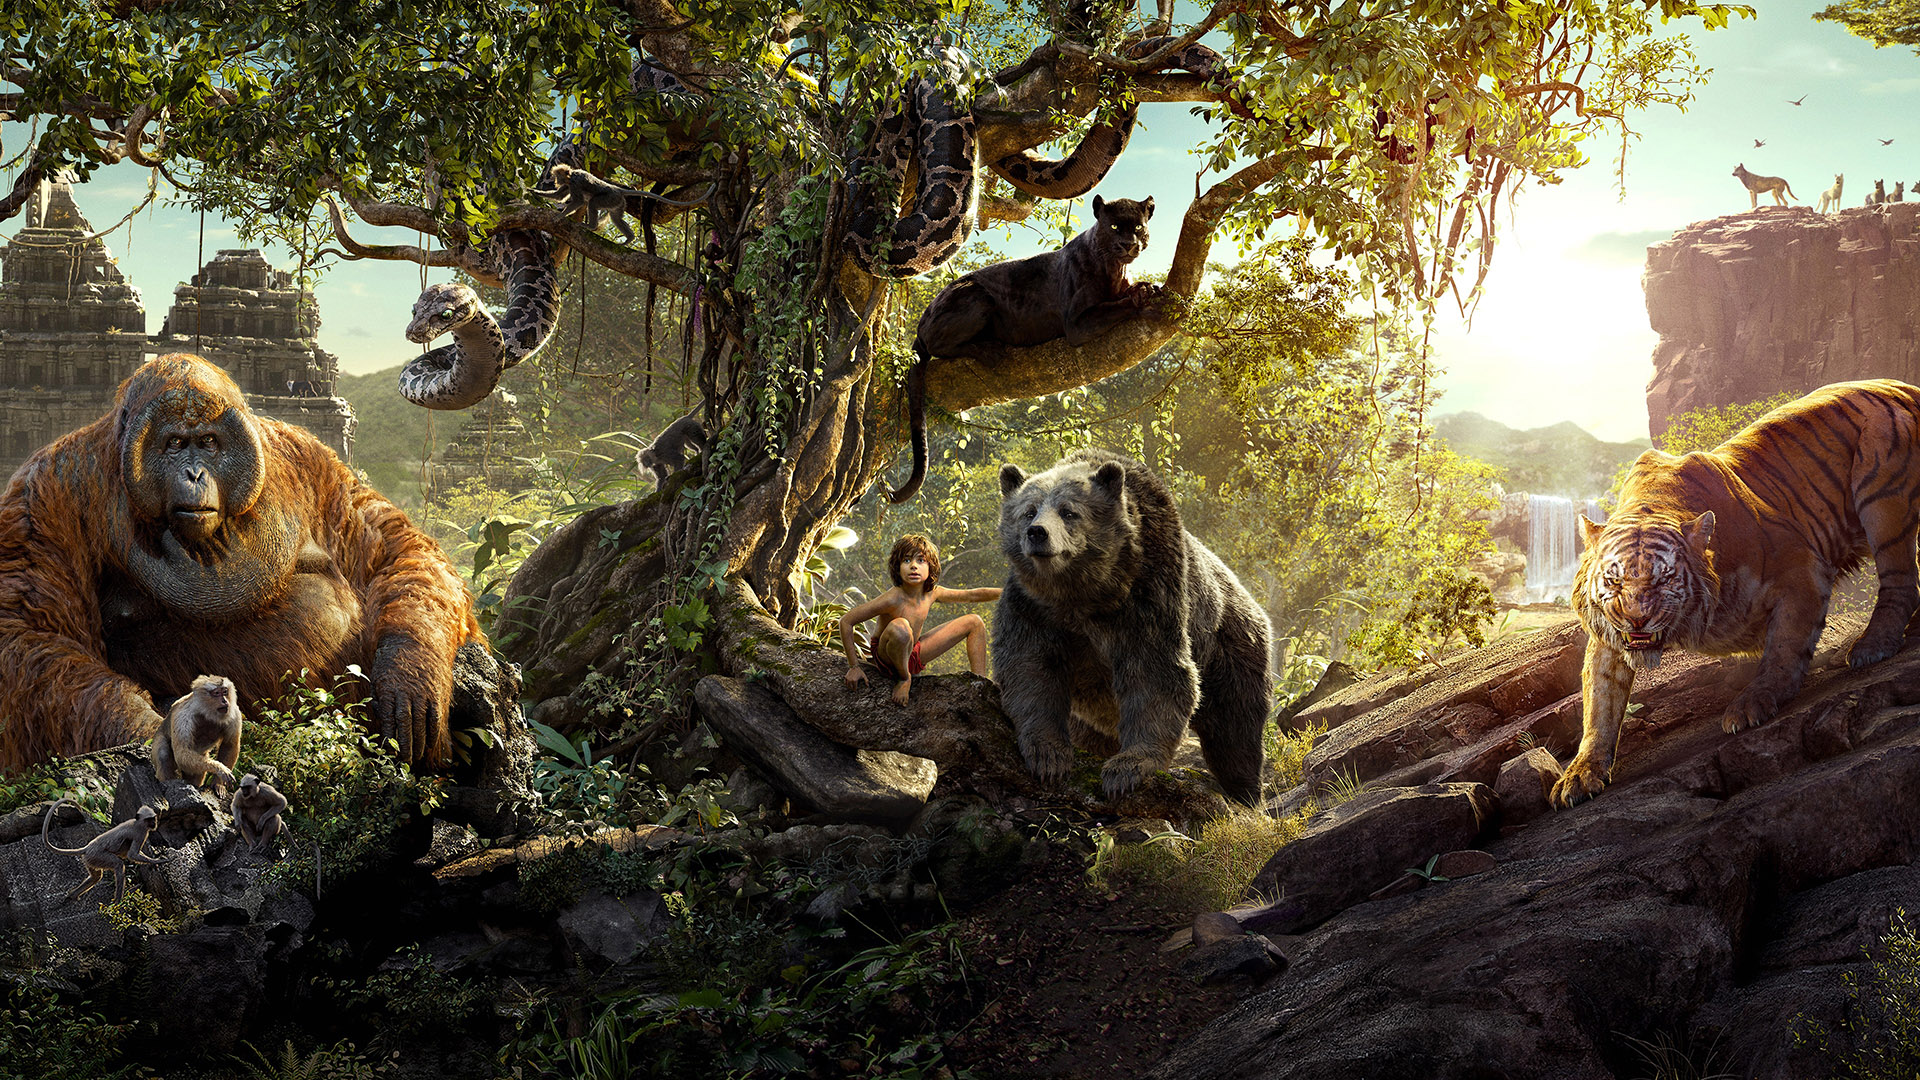 The Jungle Book Movie Animated Poster Wallpaper Wallpaperbyte